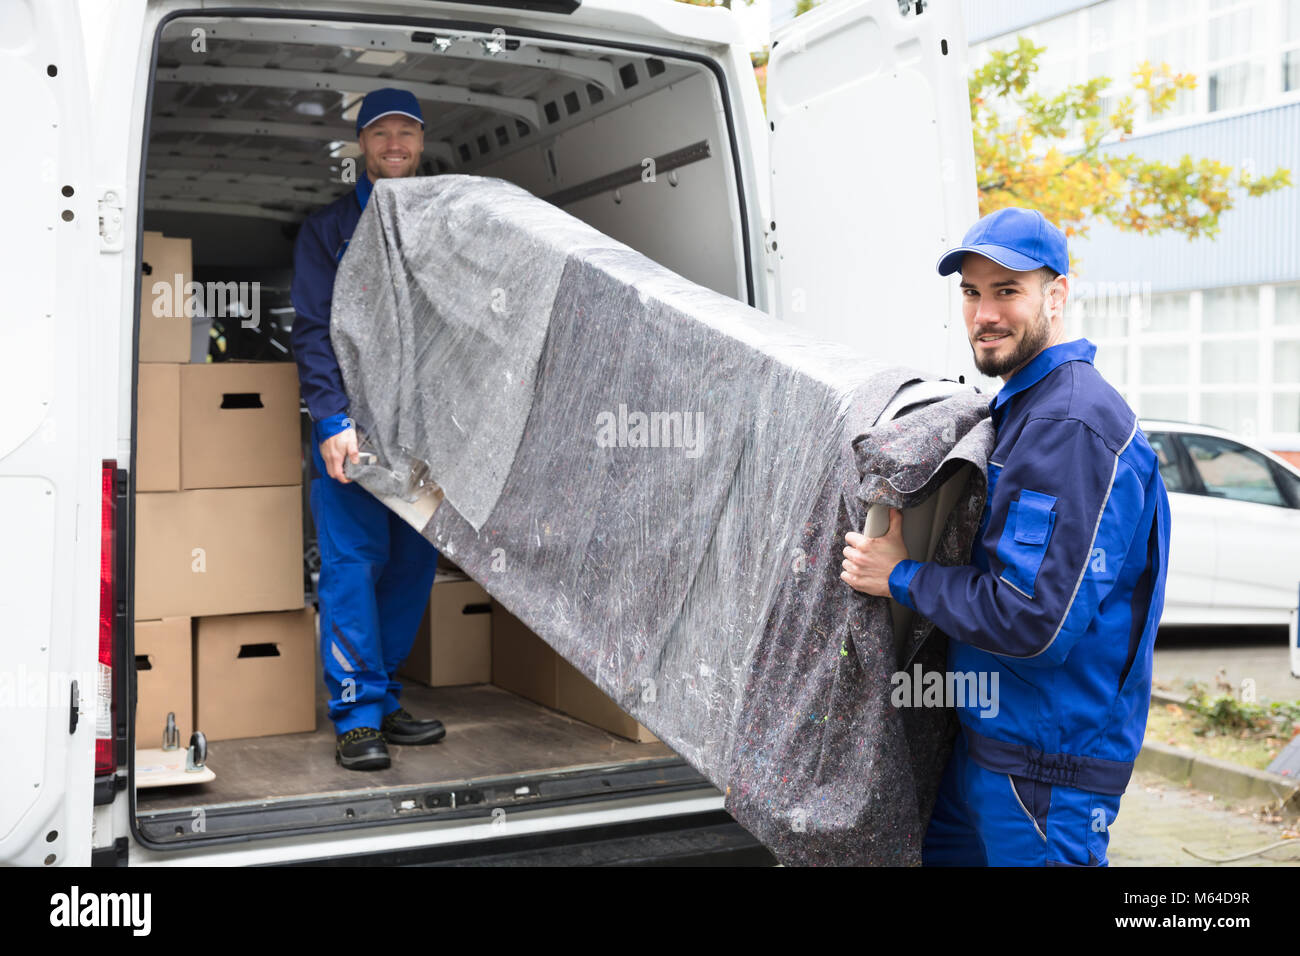 Two Young Delivery Men In Uniform Unloading Furniture From Vehicle Stock Photo